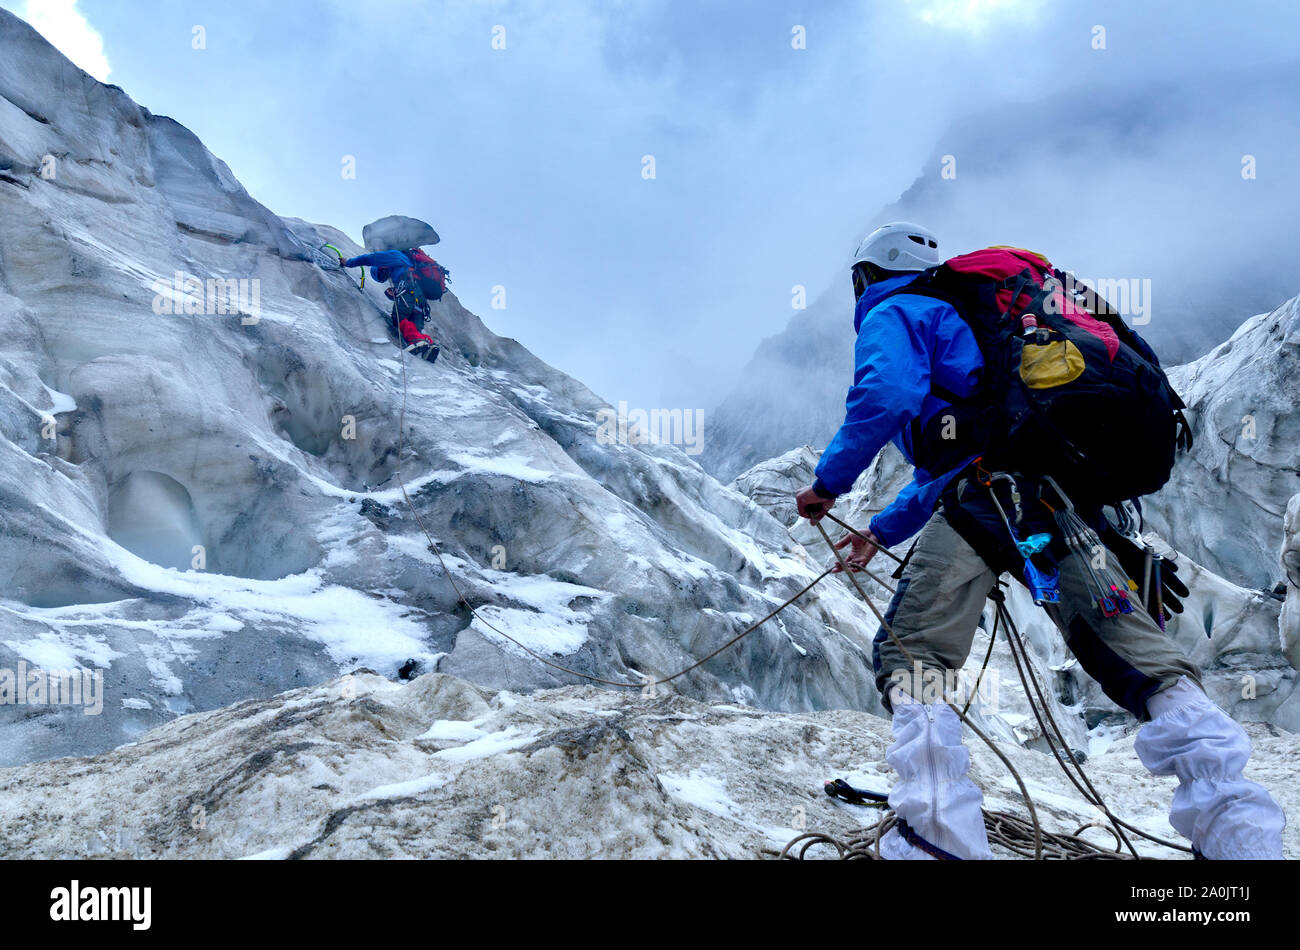 Two climbers are climbing the ice wall into the cloudy weather. Stock Photo